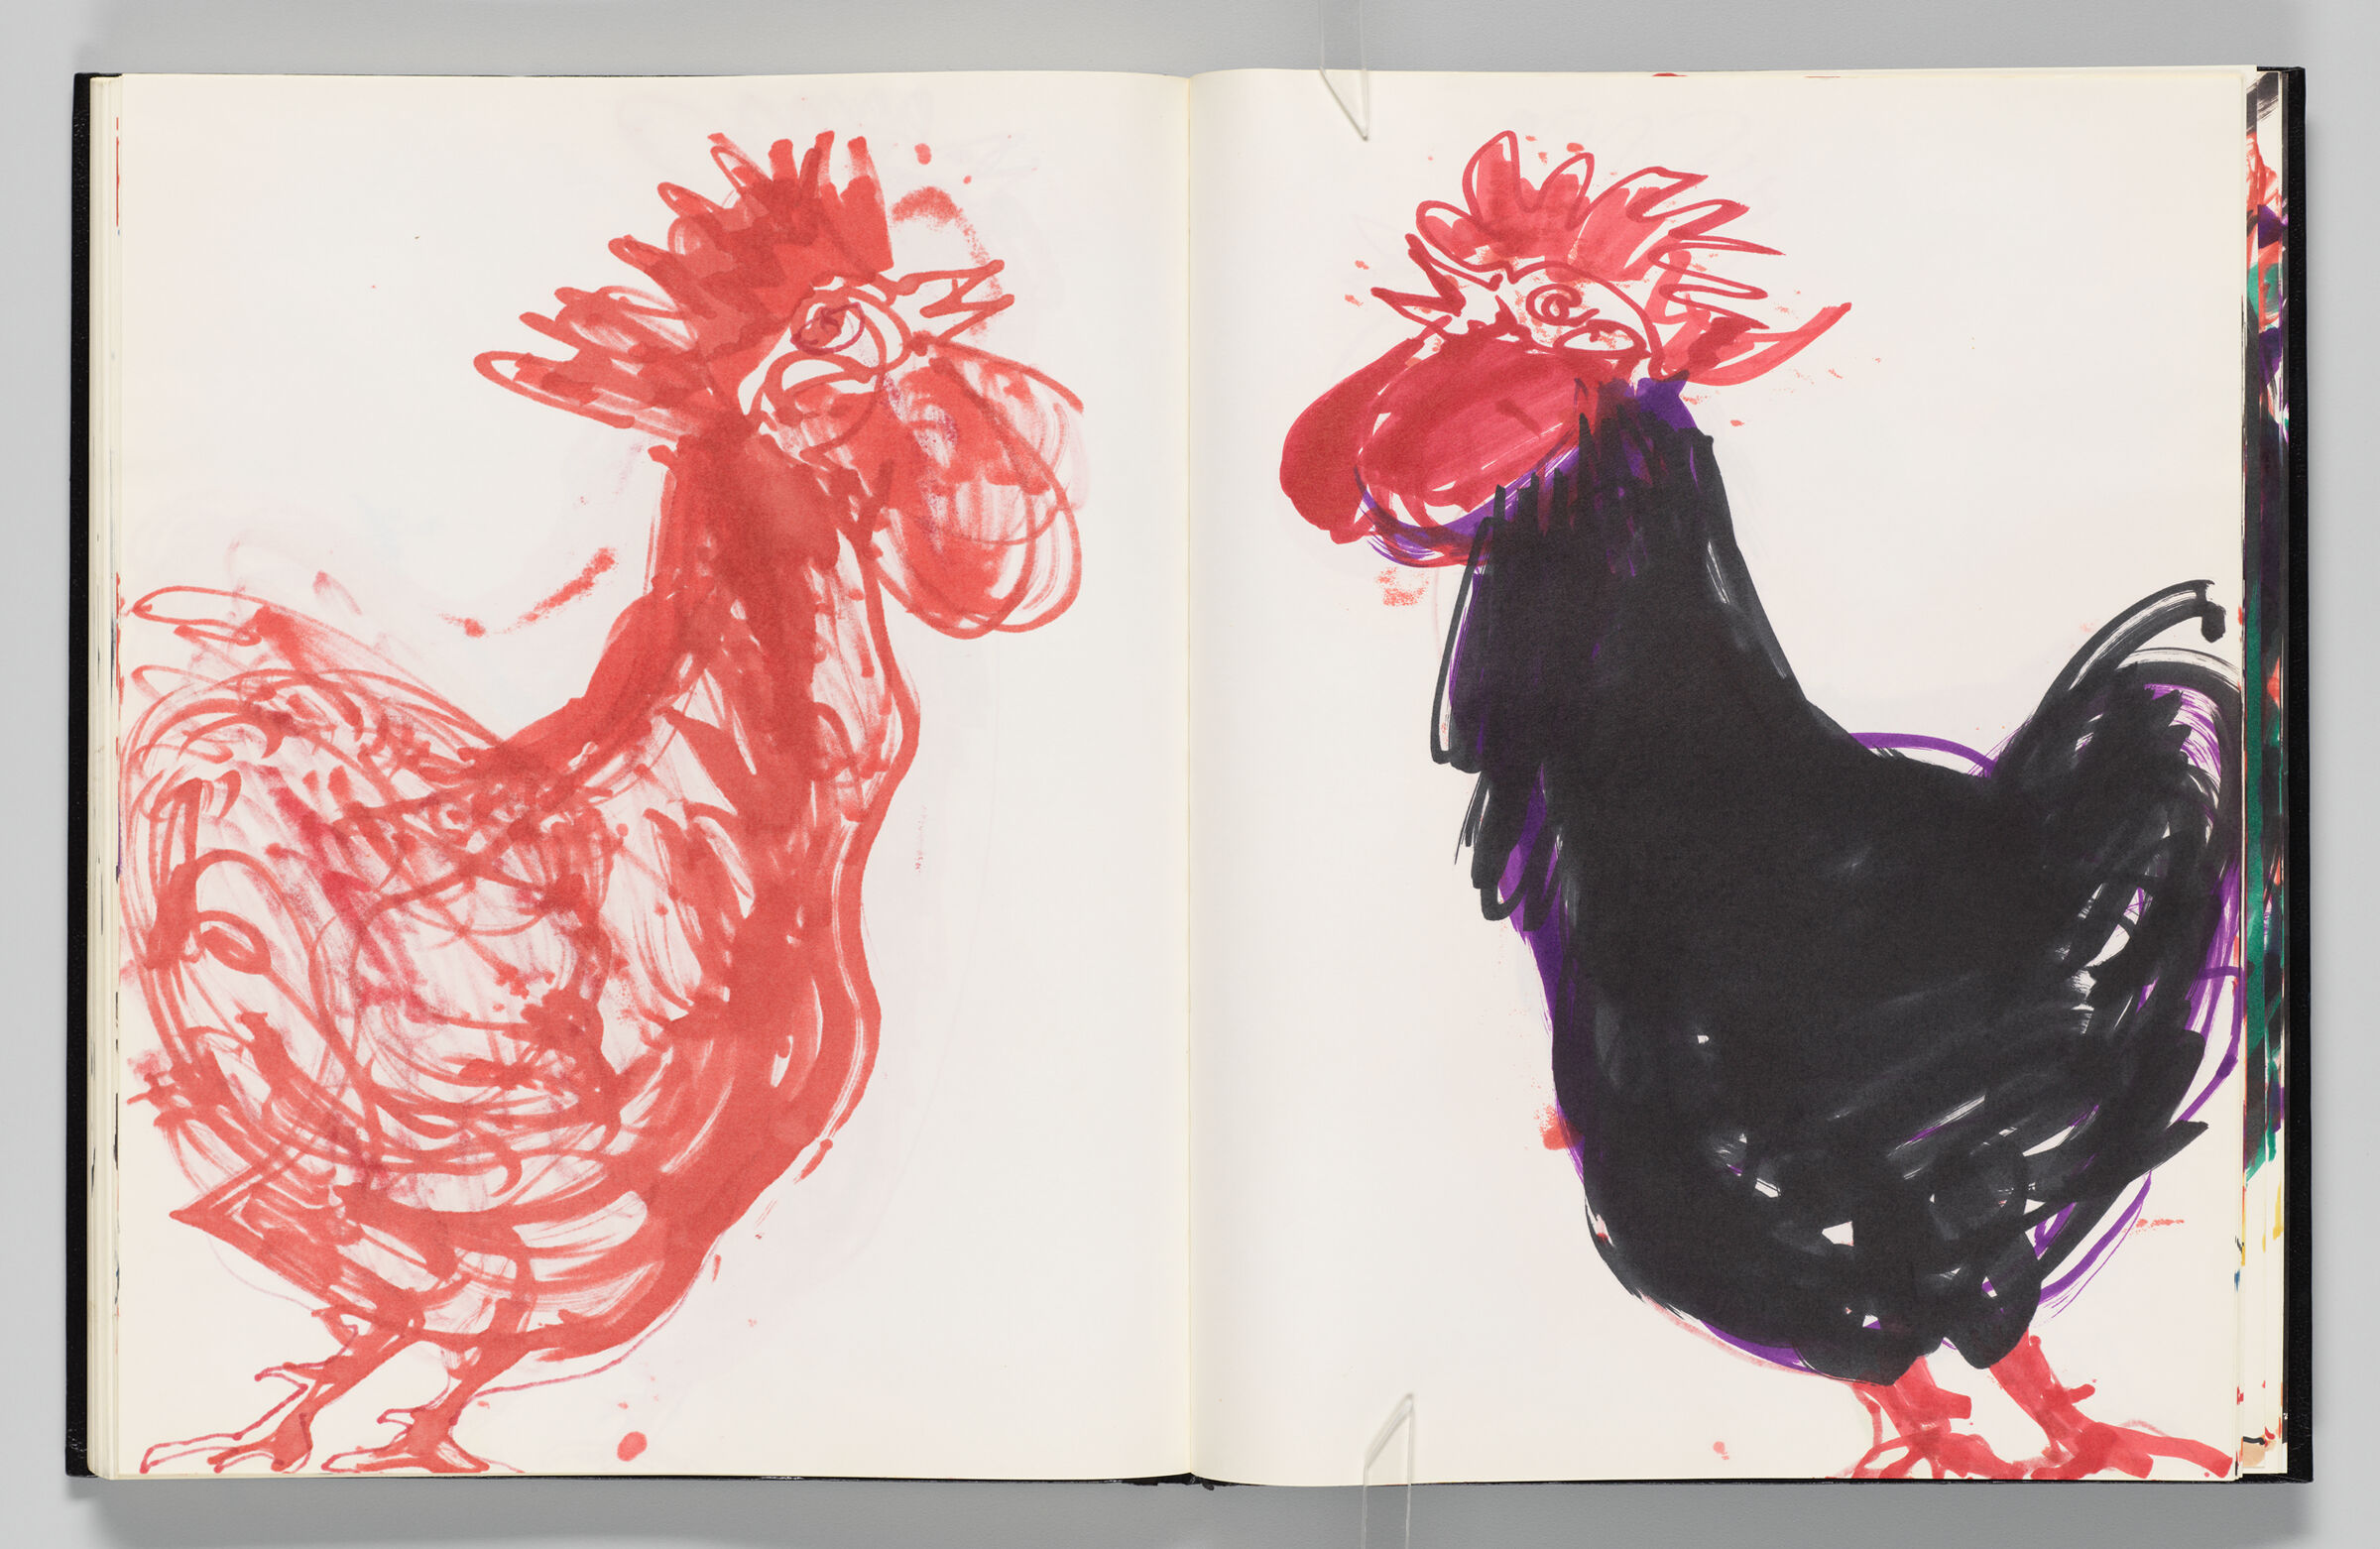 Untitled (Bleed-Through Of Previous Page, Left Page); Untitled (Rooster, Right Page)